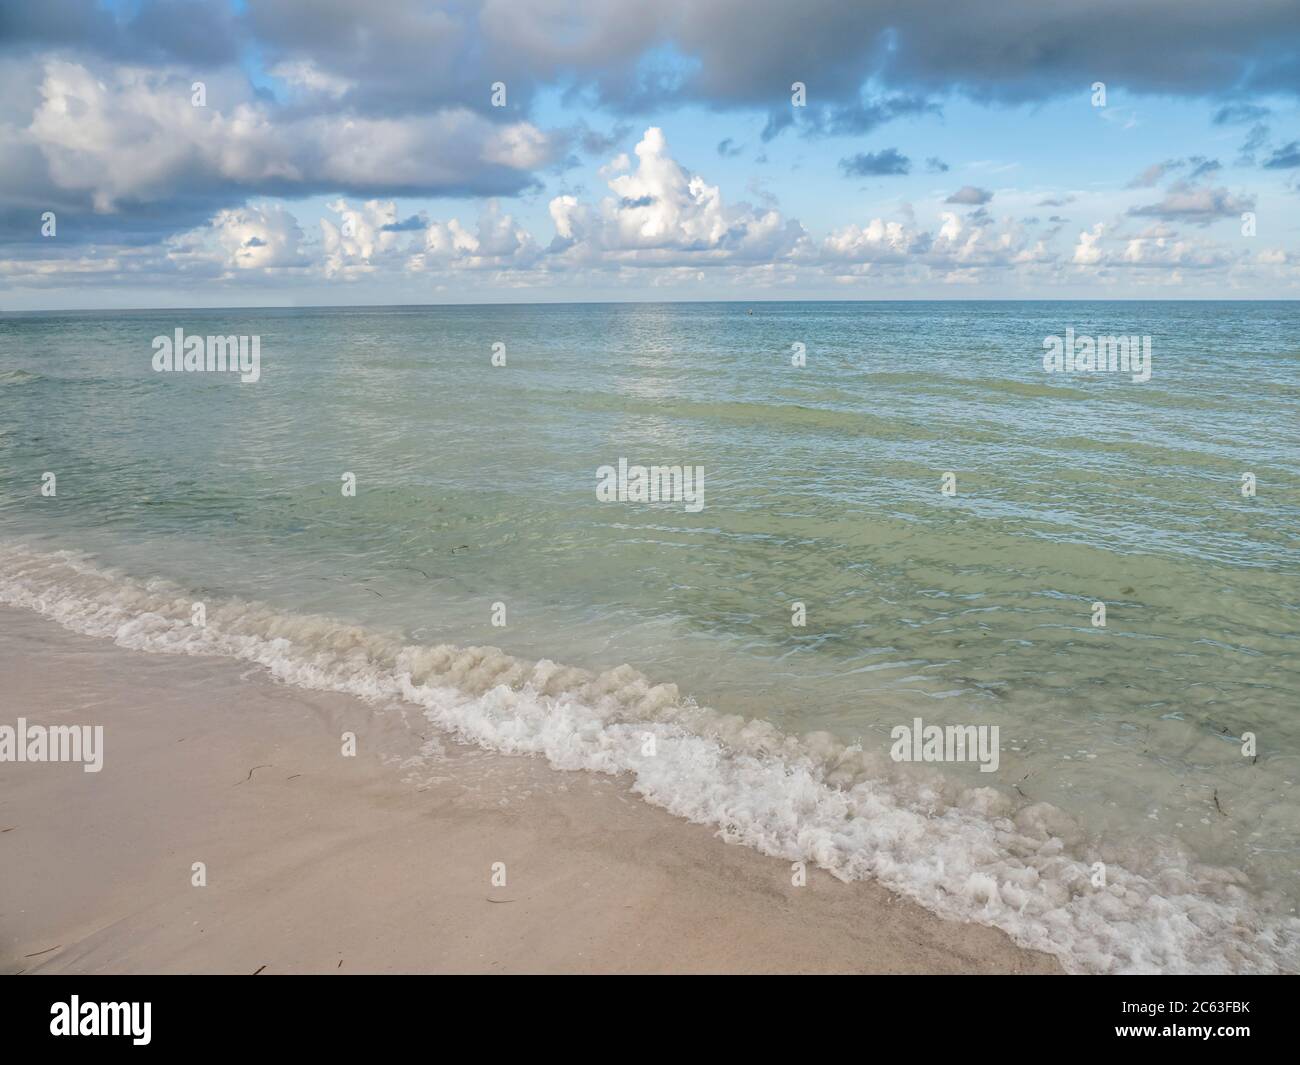 Gulf of Mexico Lido Beach on Lido Key In Sarasota Florida in the United States Stock Photo